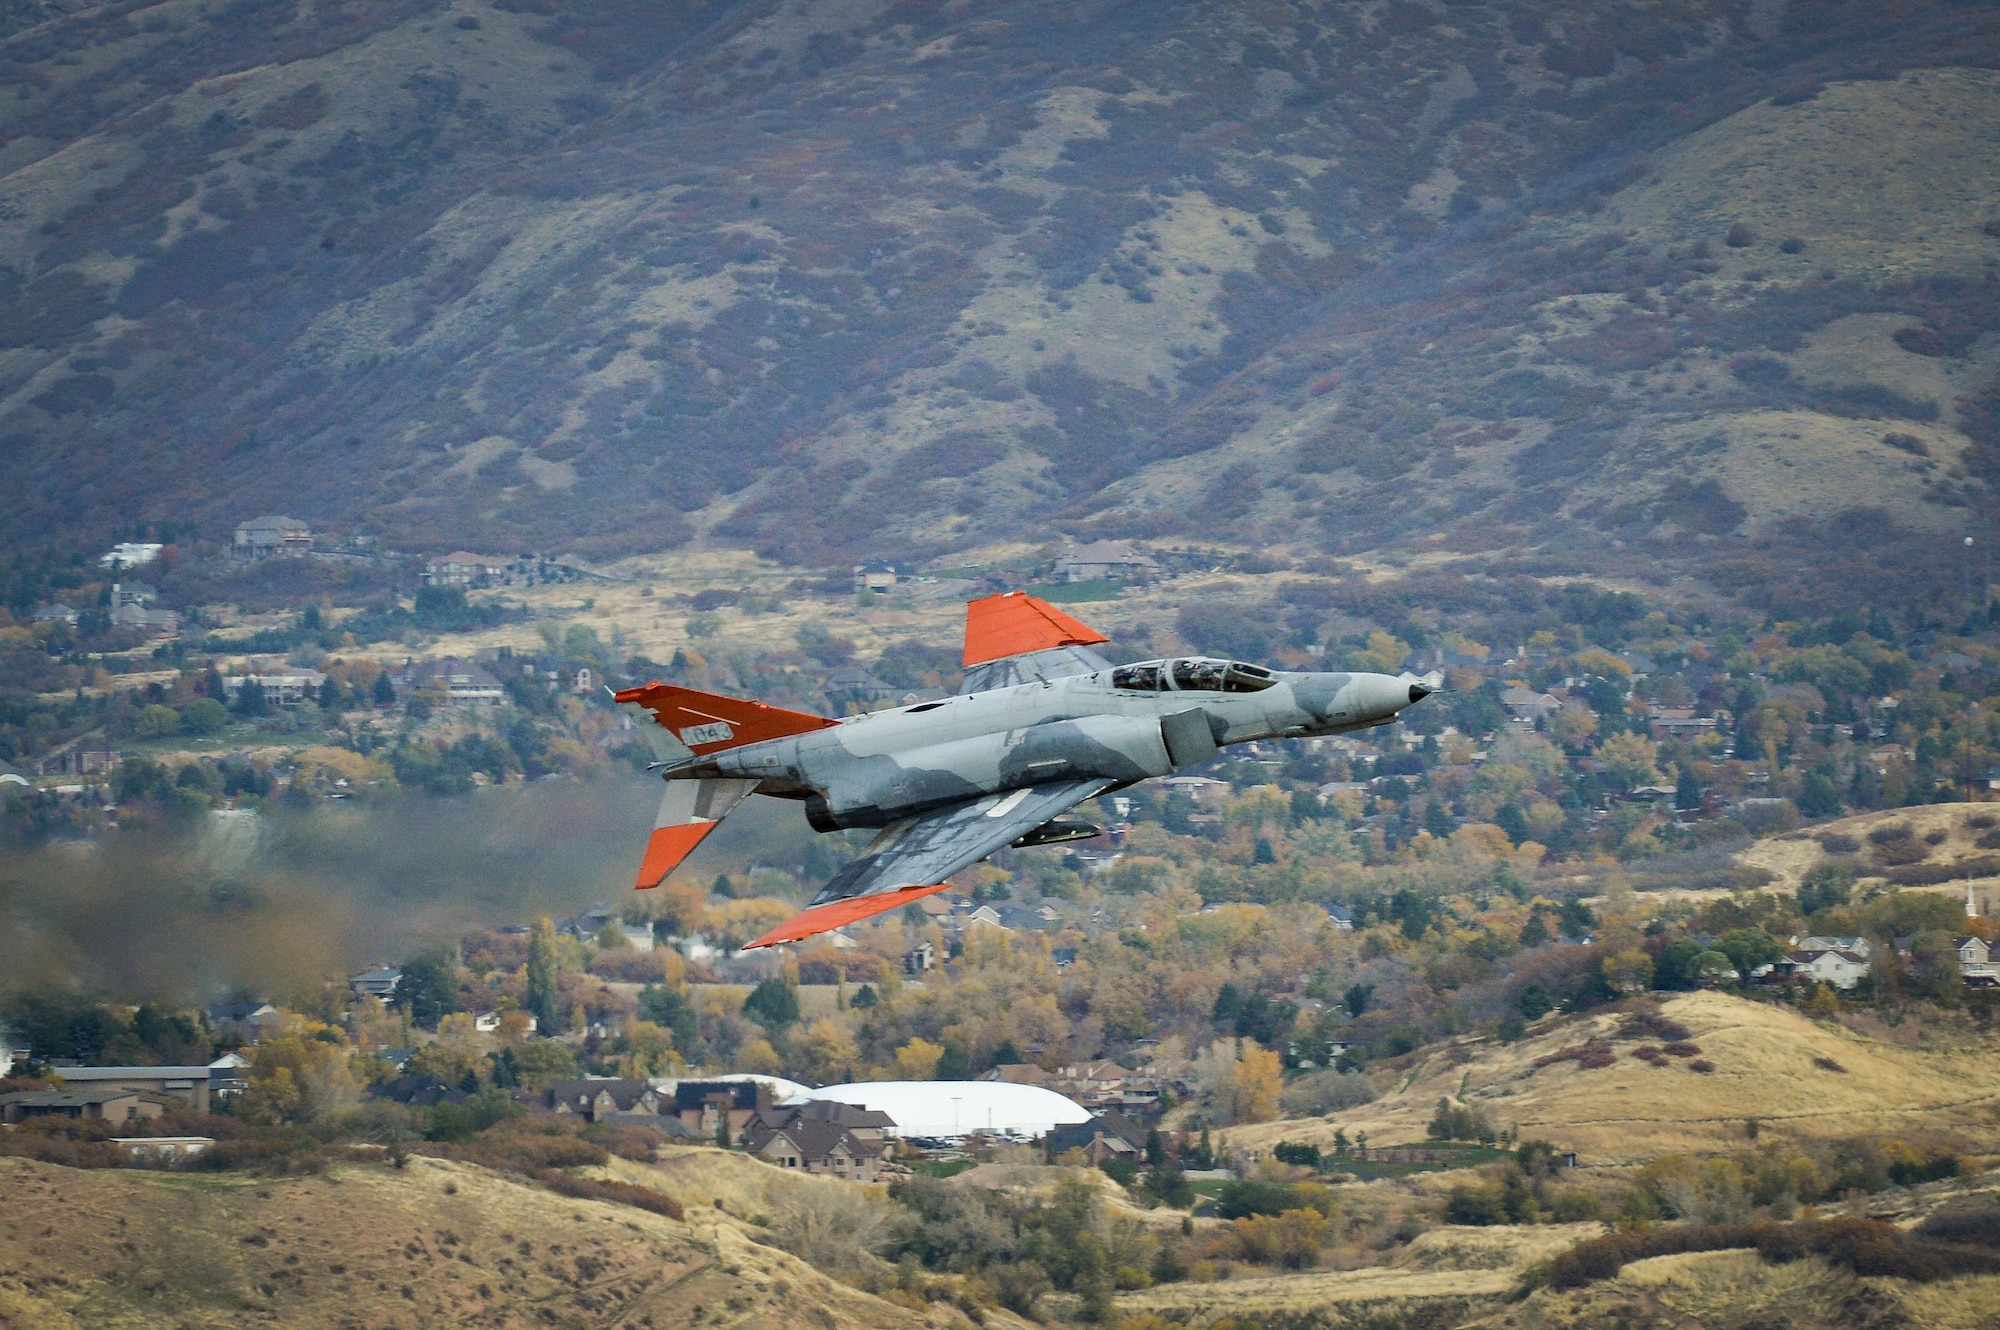 A QF-4 Aerial Target aircraft in manned configuration, piloted by Lt. Col. Ron King, 82nd Aerial Targets Squadron, Detachment 1 commander, Holloman Air Force Base, New Mexico, performs a flyby at Hill Air Force Base, Oct. 25. (U.S. Air Force photo by R. Nial Bradshaw)